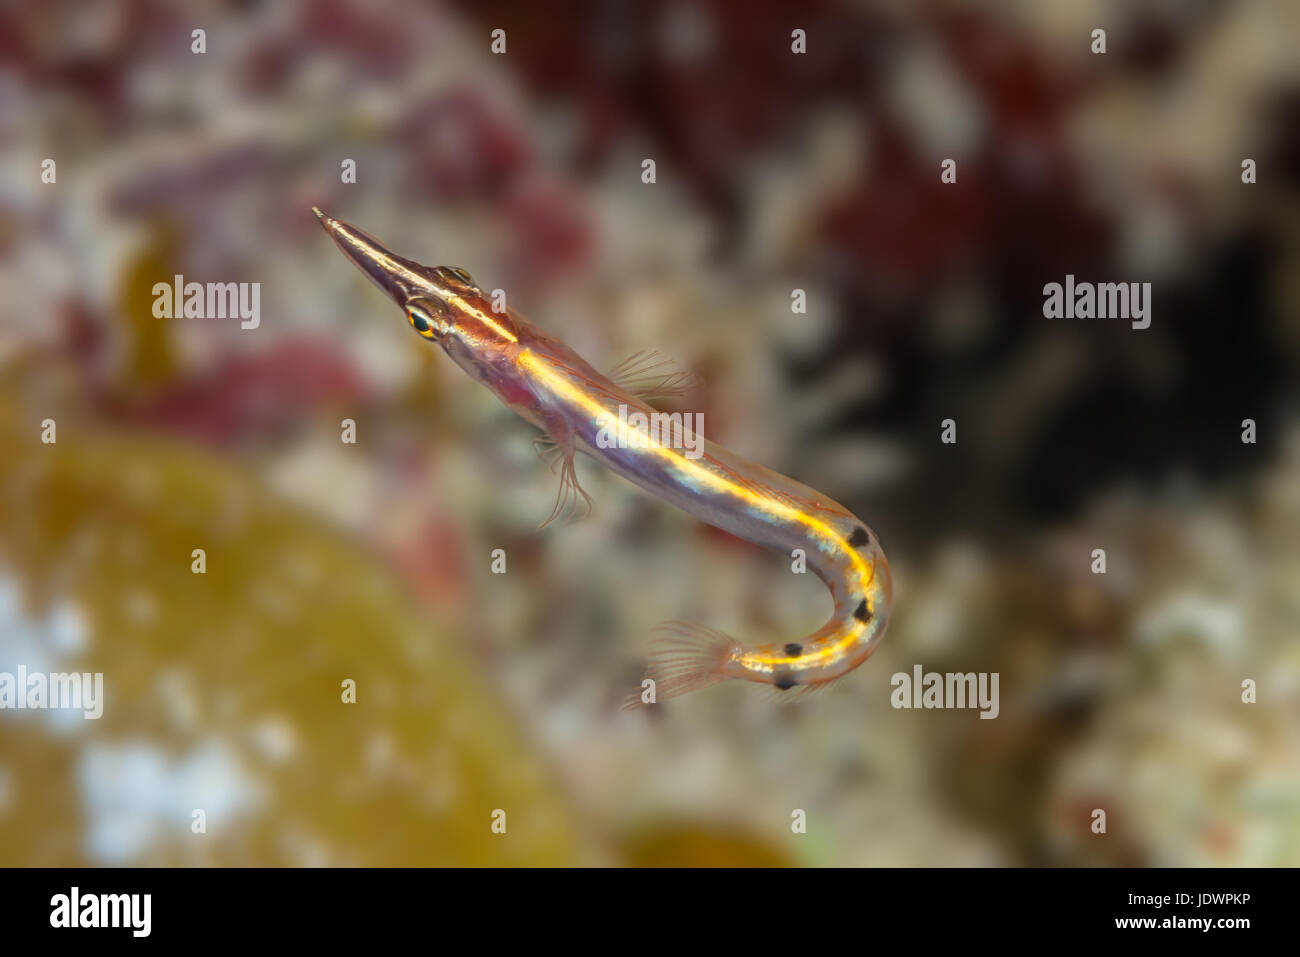 Arrow blenny (Lucayablennius zingaro) showing hooked tail, view from above. Bahamas, December Stock Photo